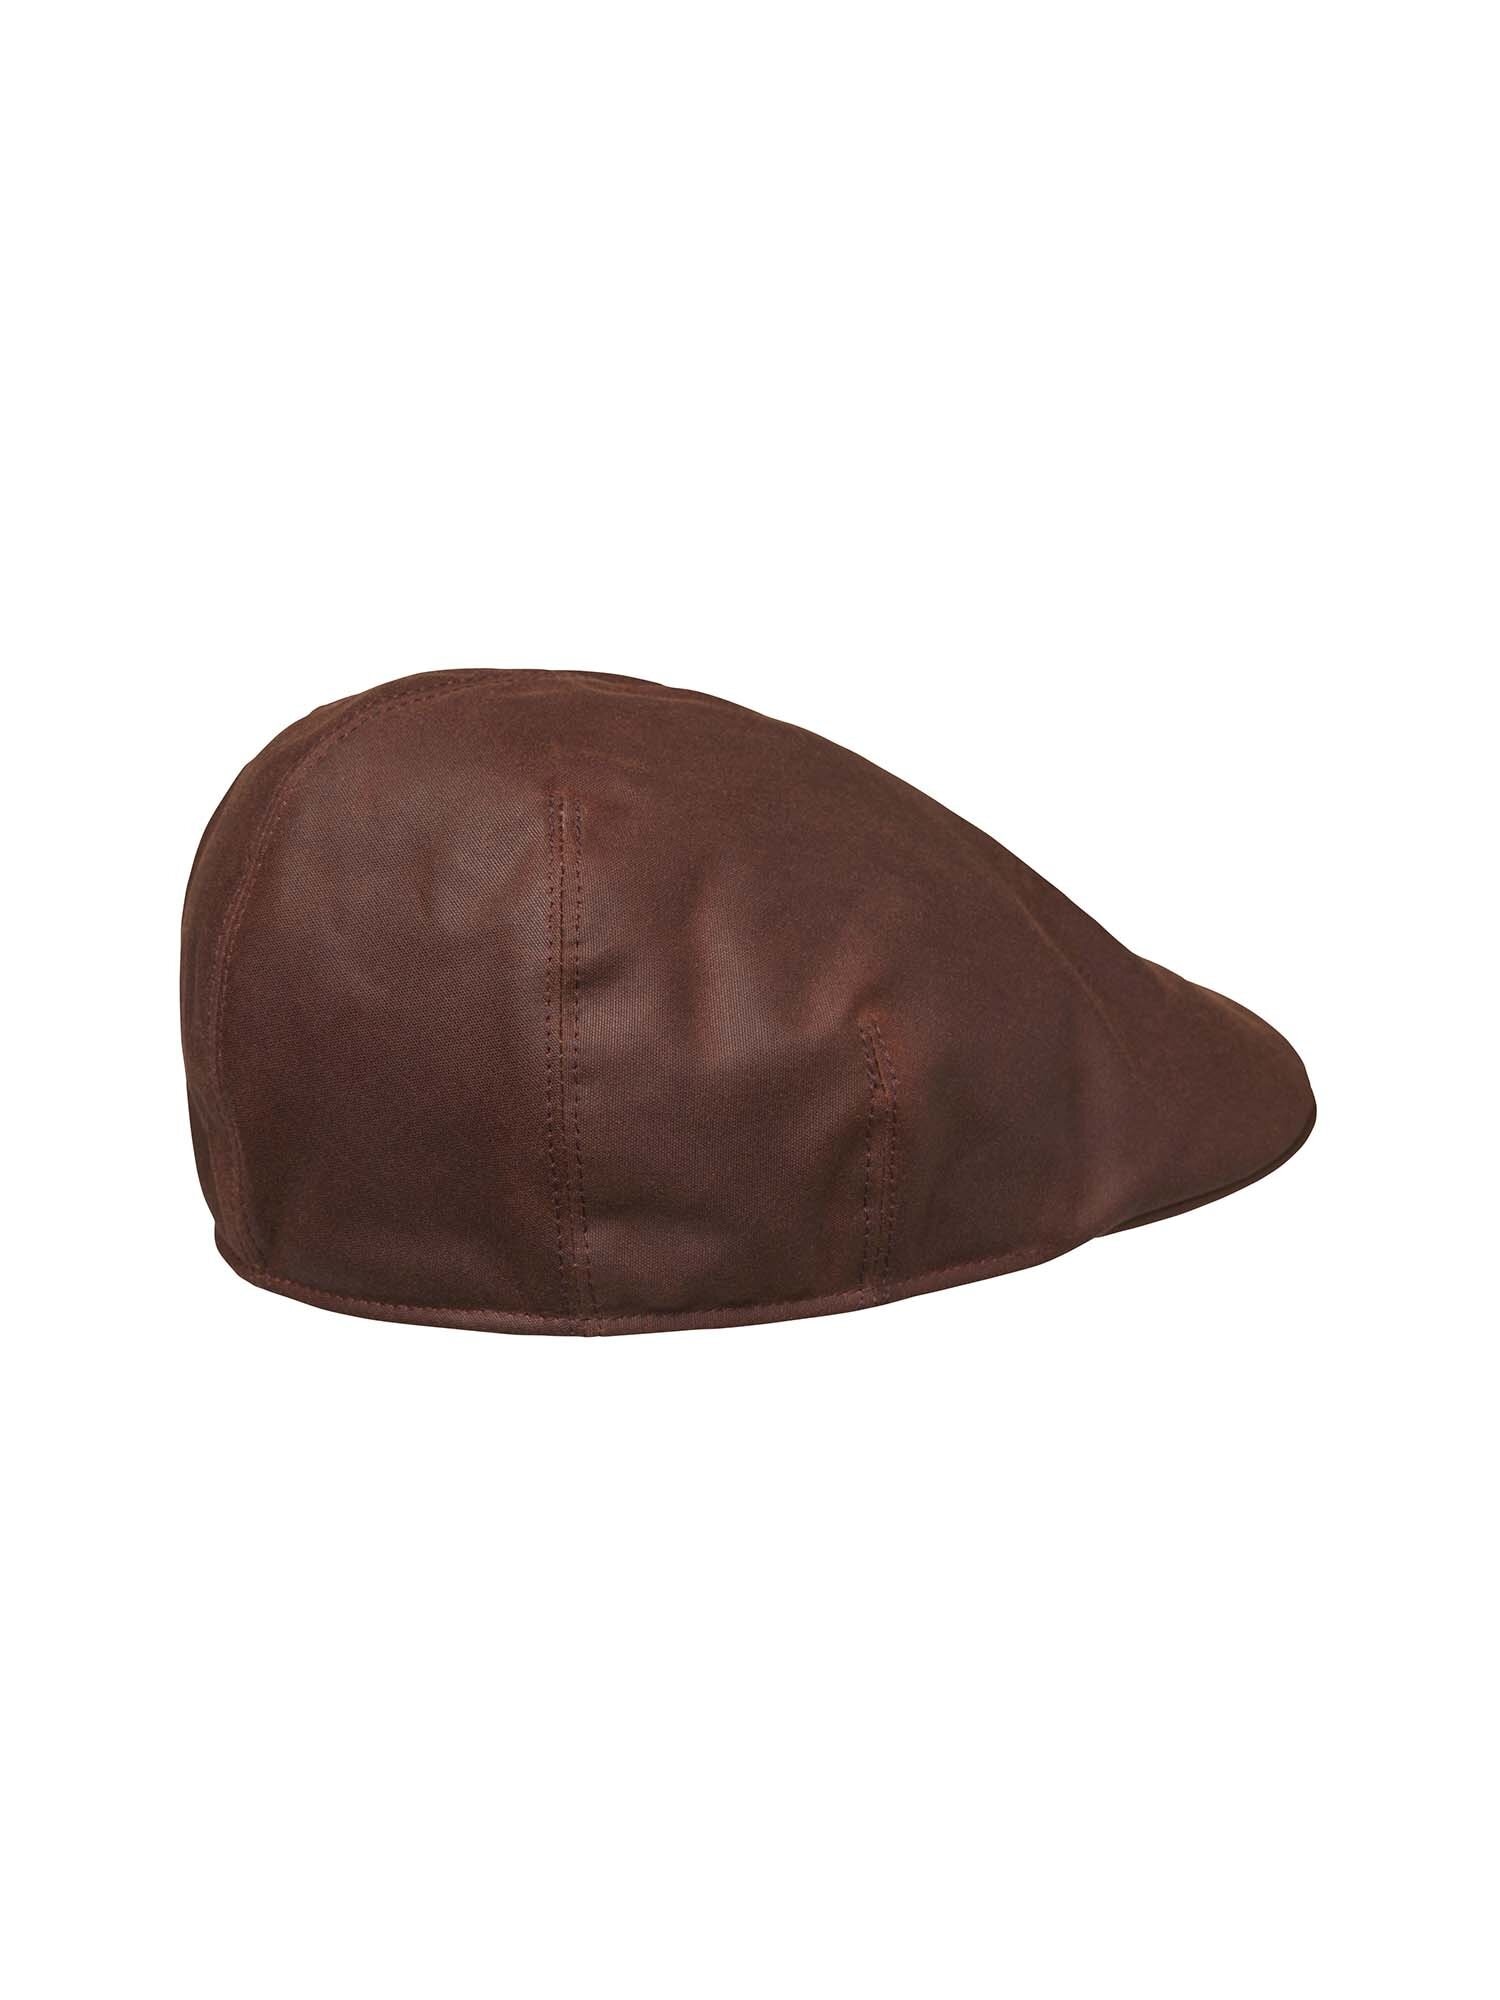 Torre Waxed Cotton Sixpence Cap